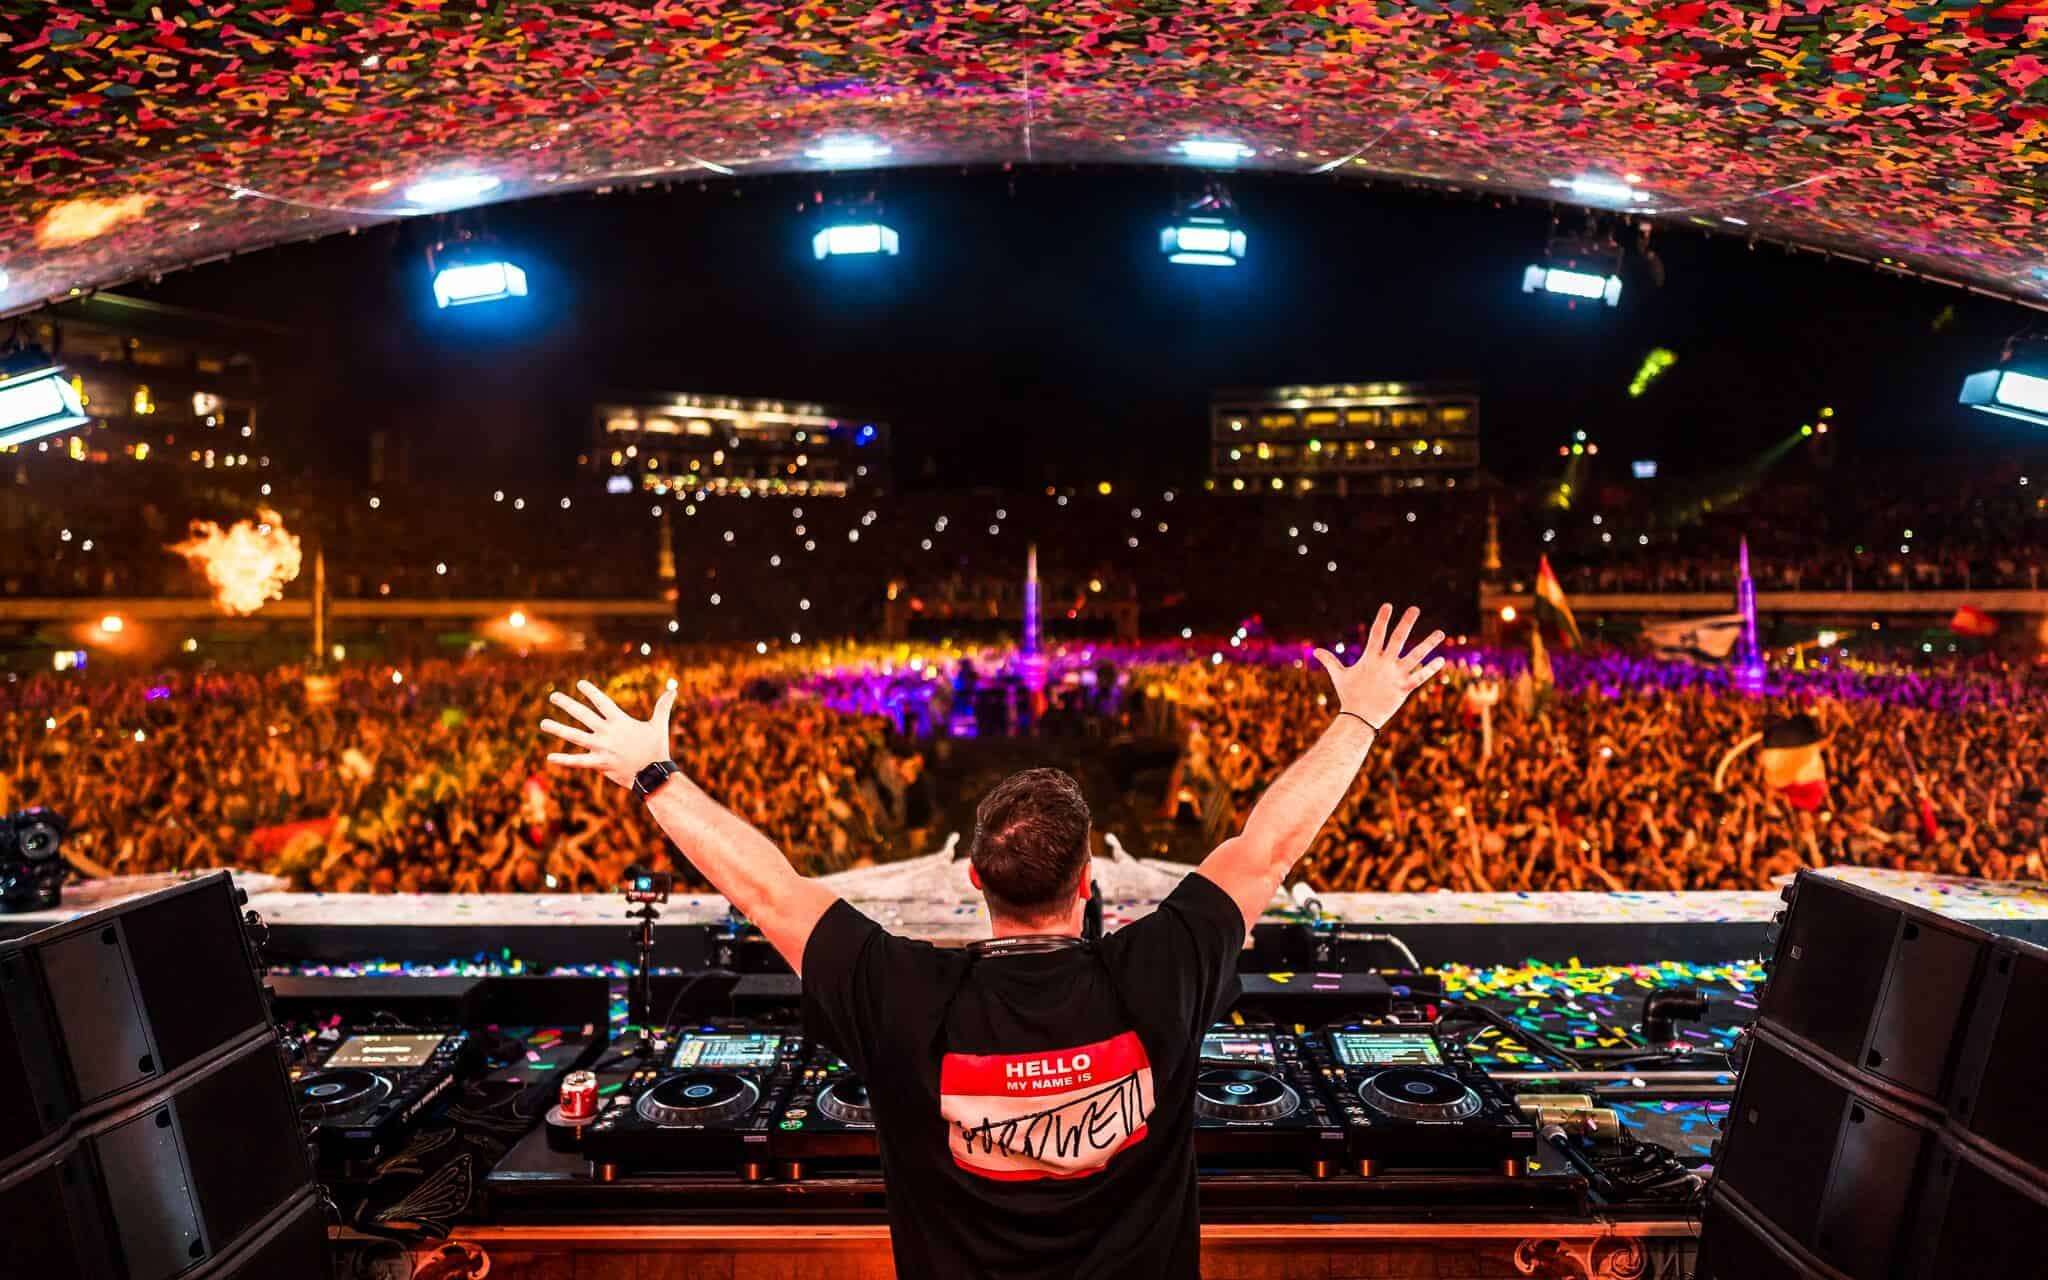 Hardwell dominates Tomorrowland 2023 mainstage with epic weekend 2 set: Watch